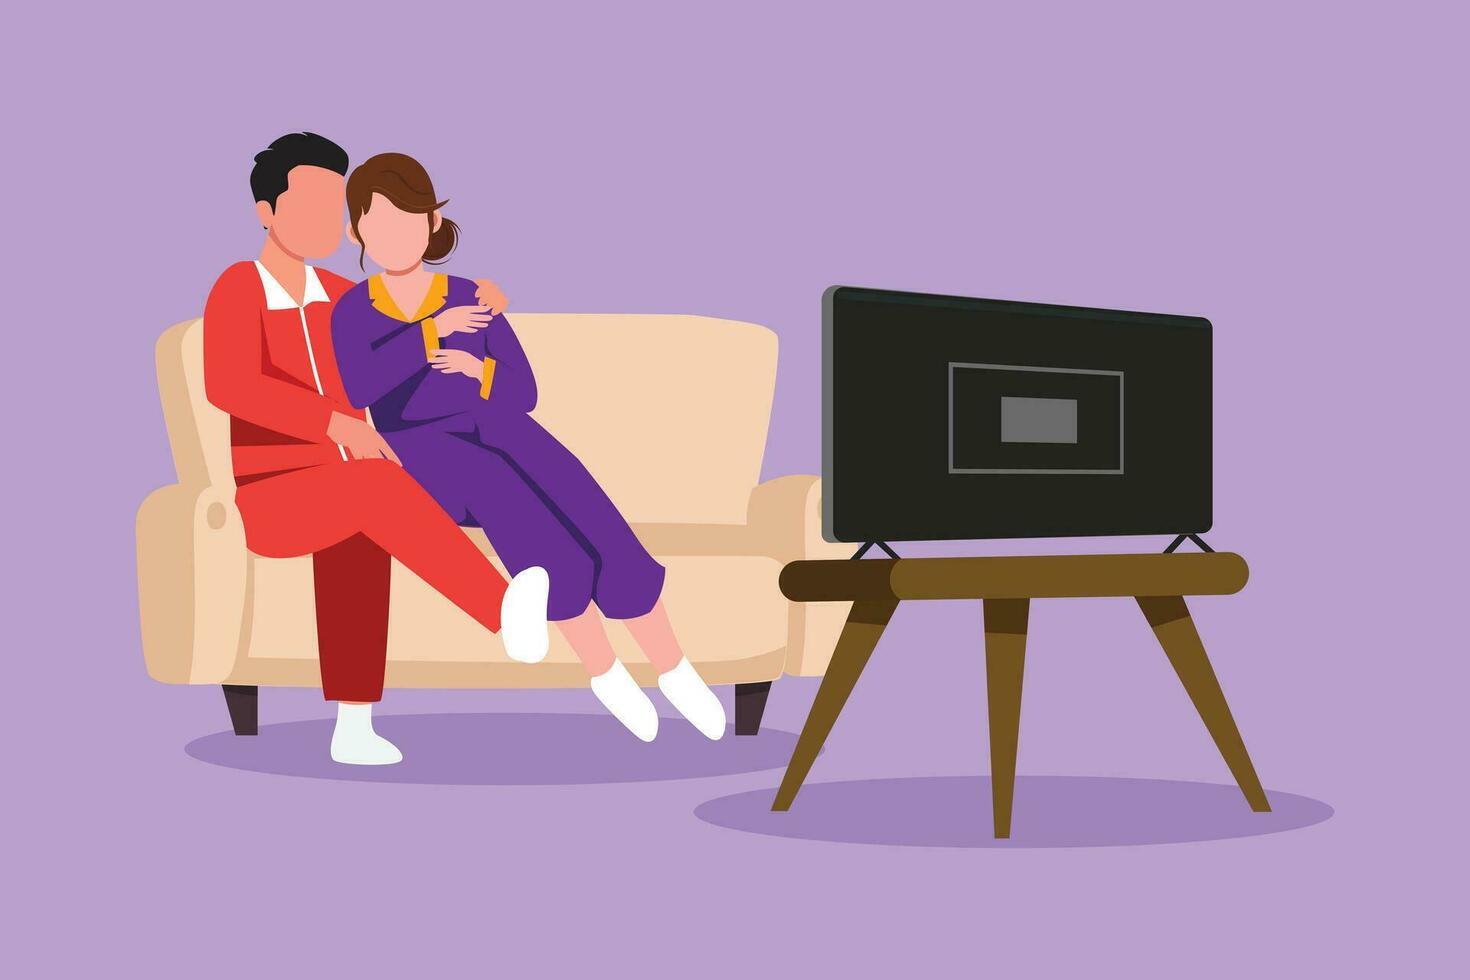 Character flat drawing cheerful couple watching TV together sitting on sofa. Happy man and pretty woman relaxing in living room. Romantic couple having fun together. Cartoon design vector illustration